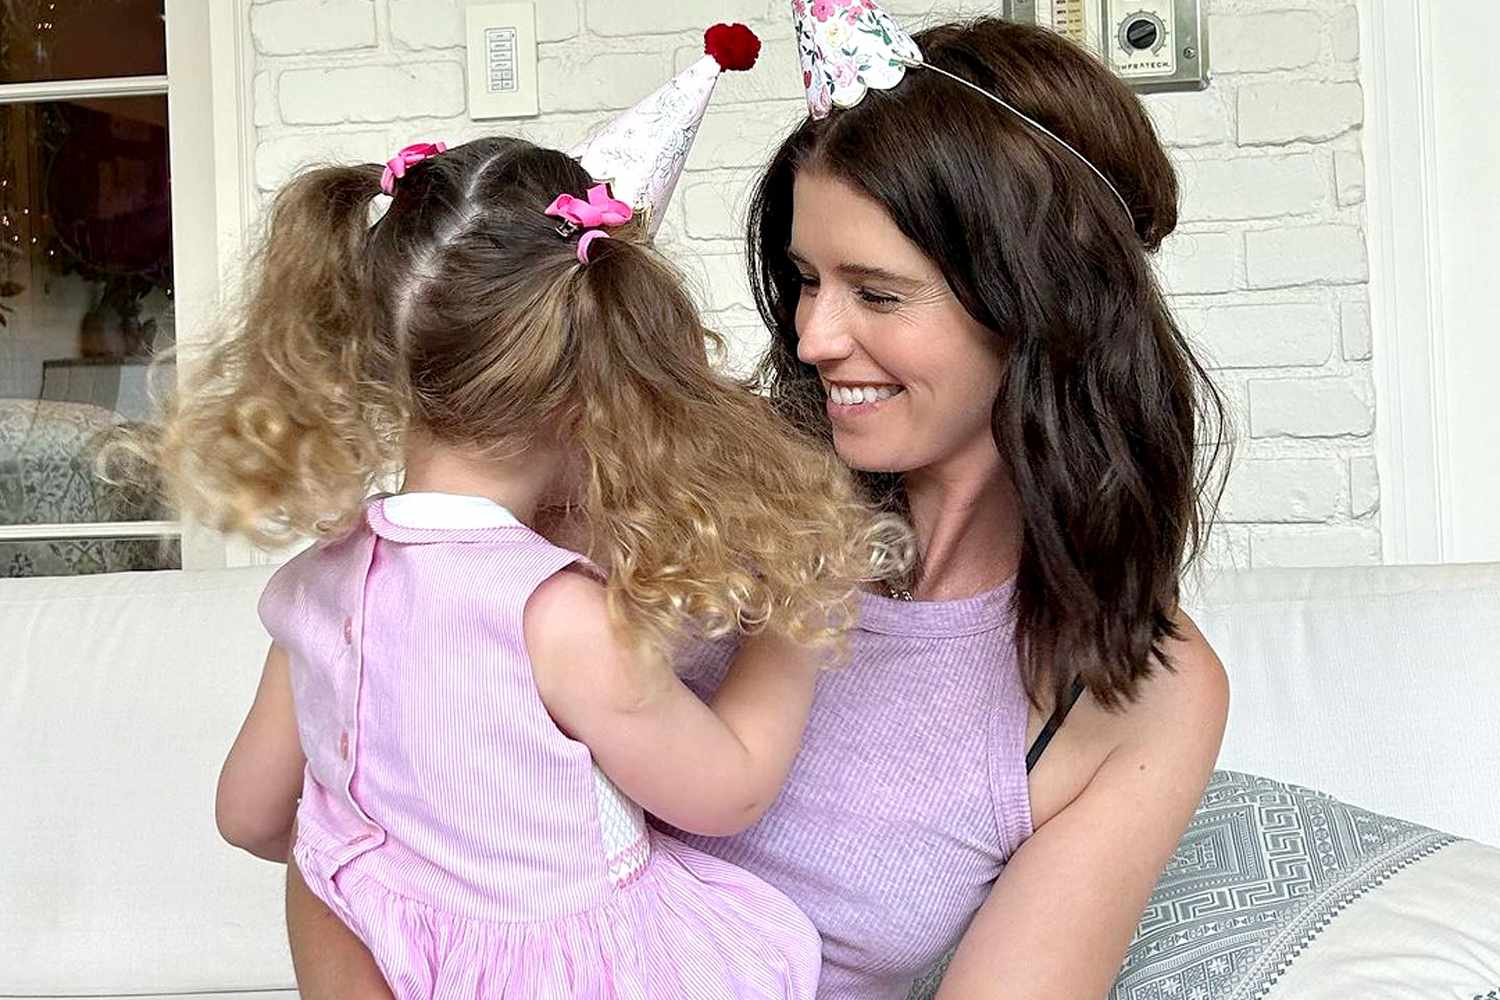 Katherine Schwarzenegger Reveals the Sweet Mother's Day Gift Her Daughter Has Planned: 'Fun Chaos' (Exclusive)